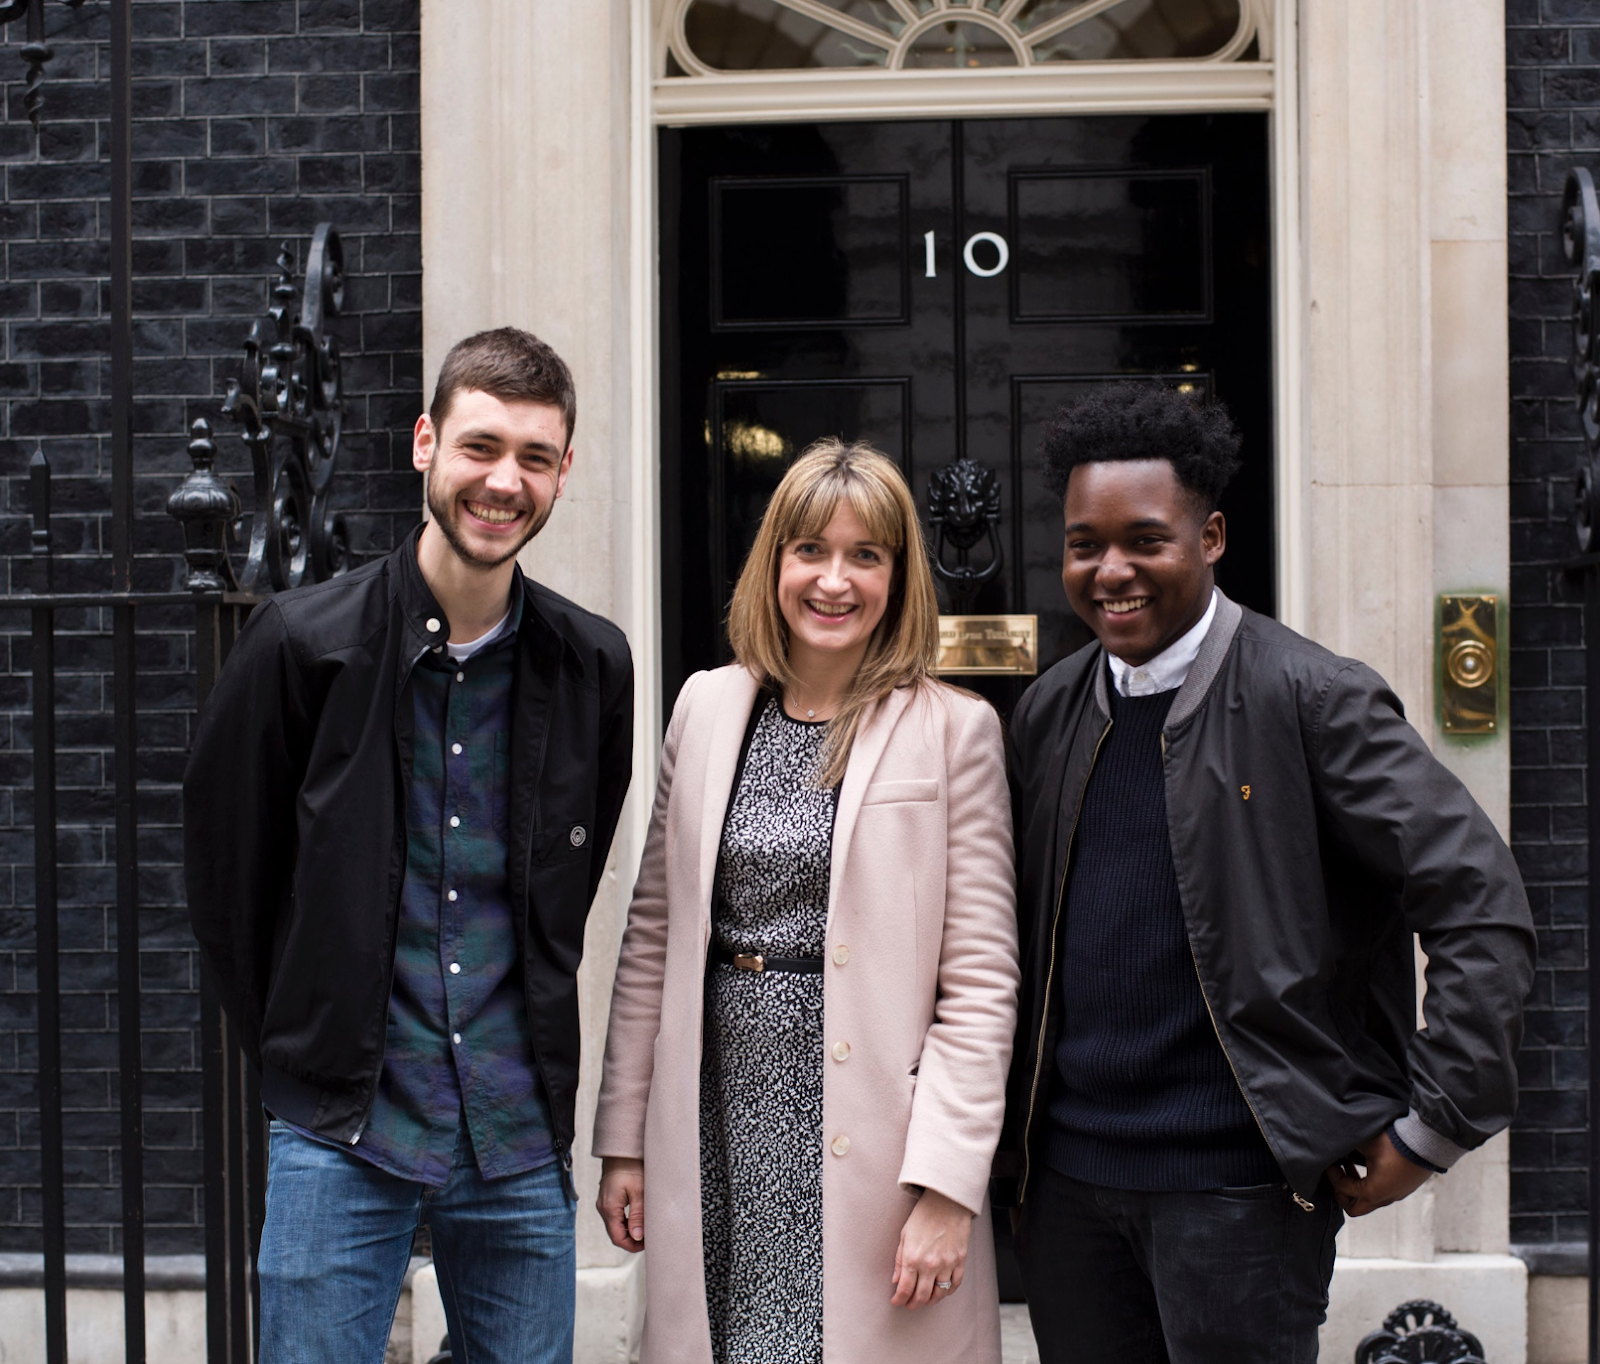 (Bejay at Downing Street, with Kirstie Managing Director of Barclays Lifeskills)